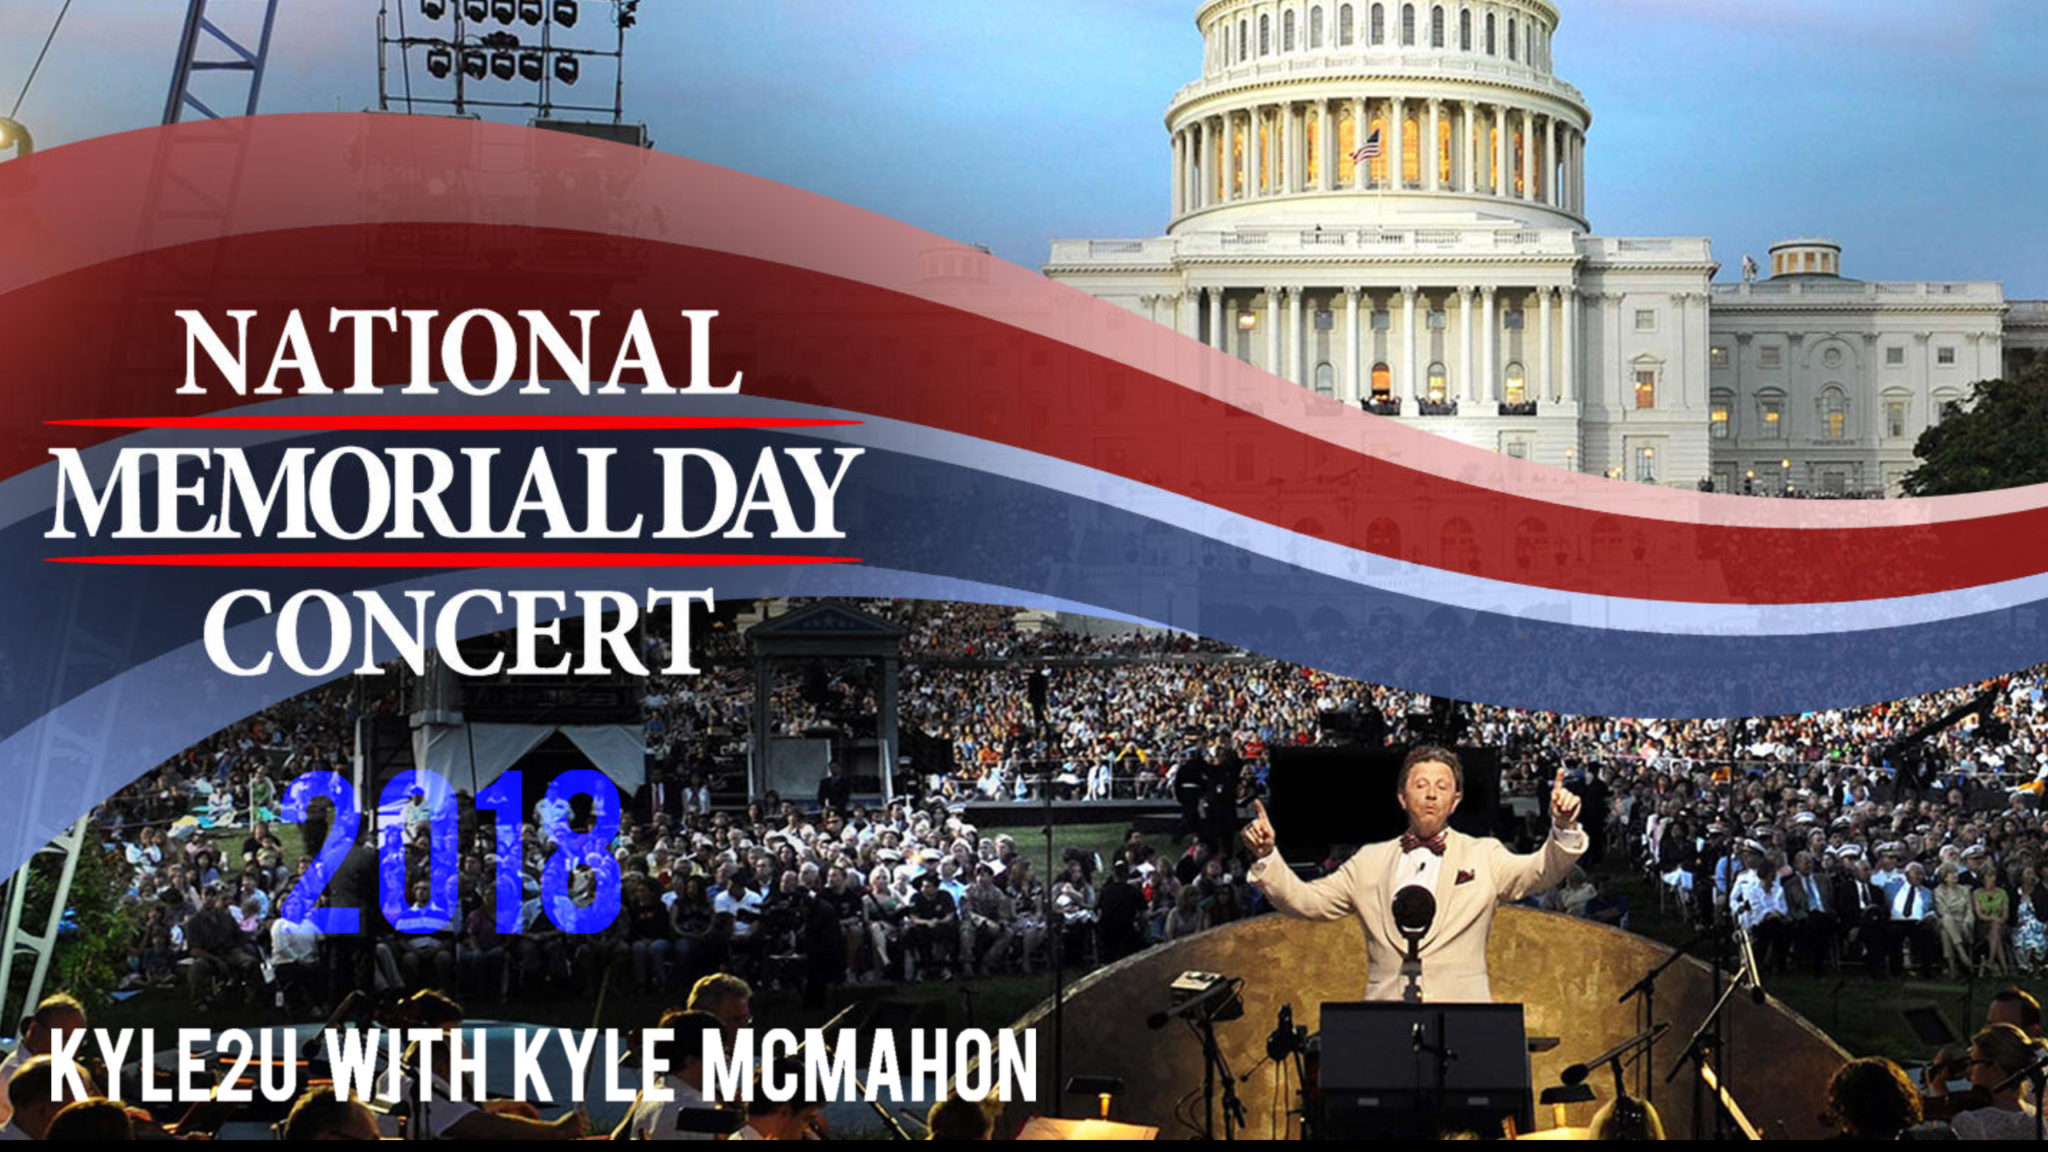 National Memorial Day Concert 2018 with Kyle McMahon